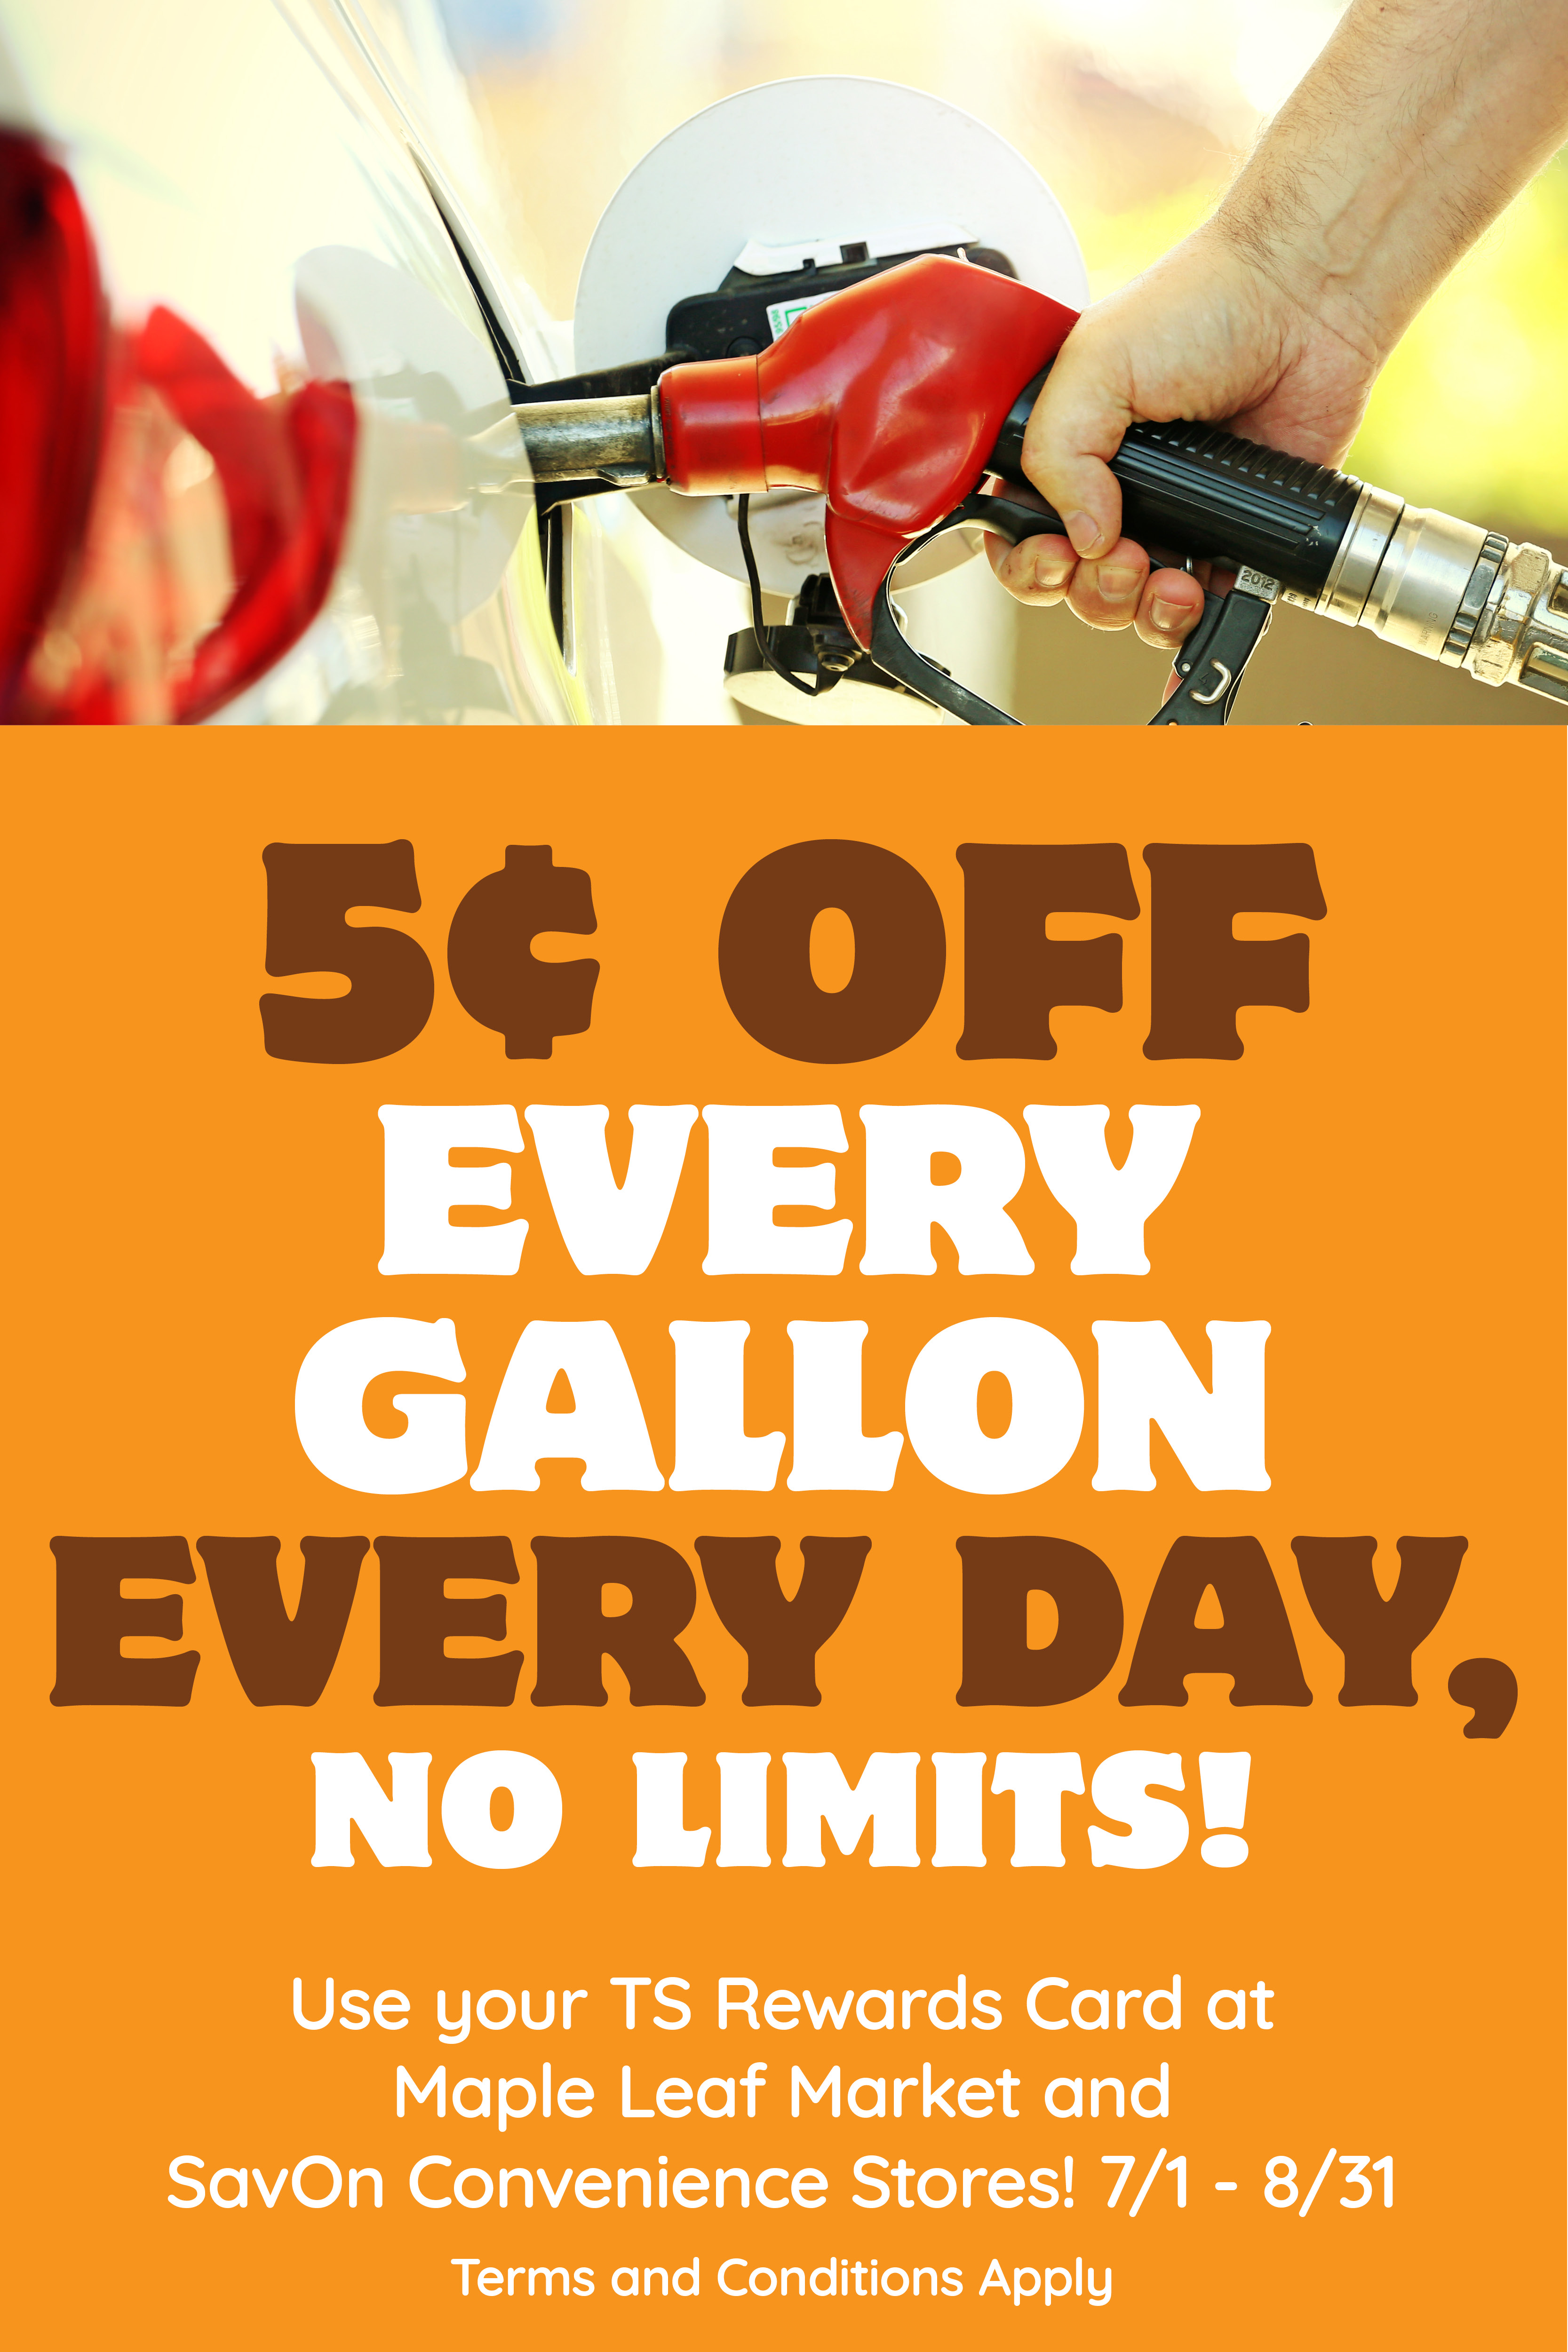 5 cents off every gallon every day, no limits